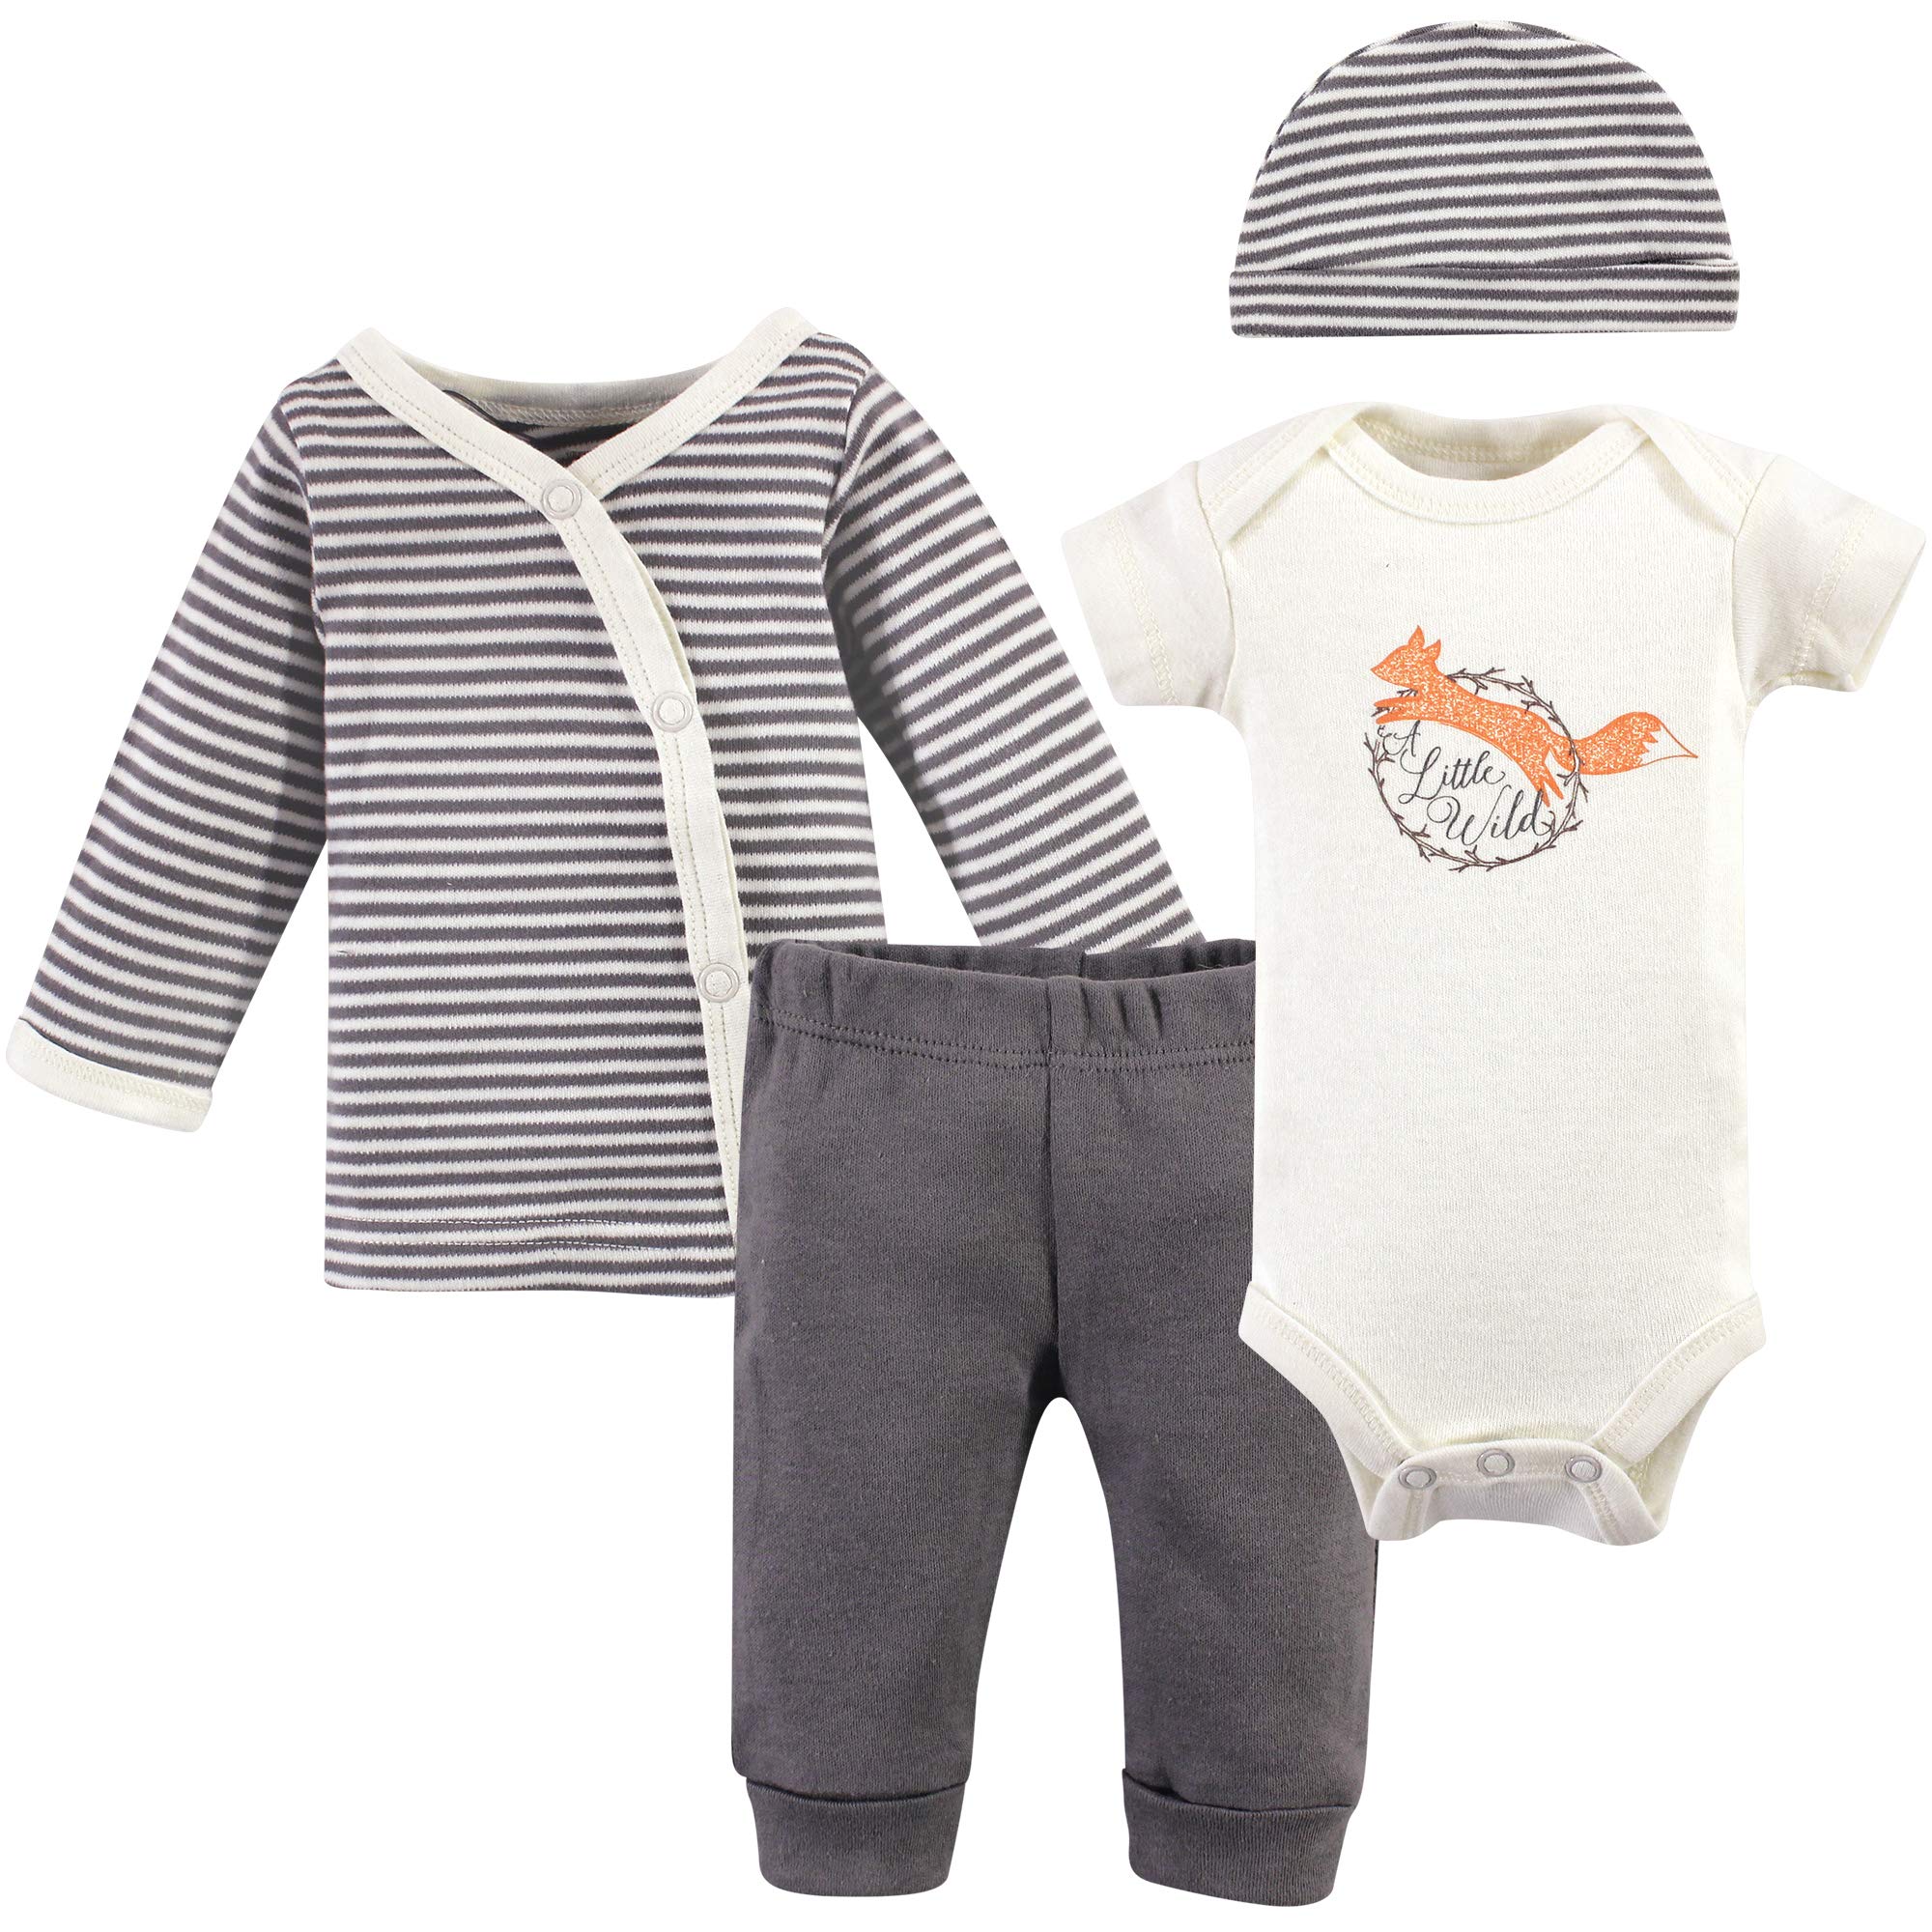 Touched by Nature Unisex Baby Organic Cotton Preemie Layette Set